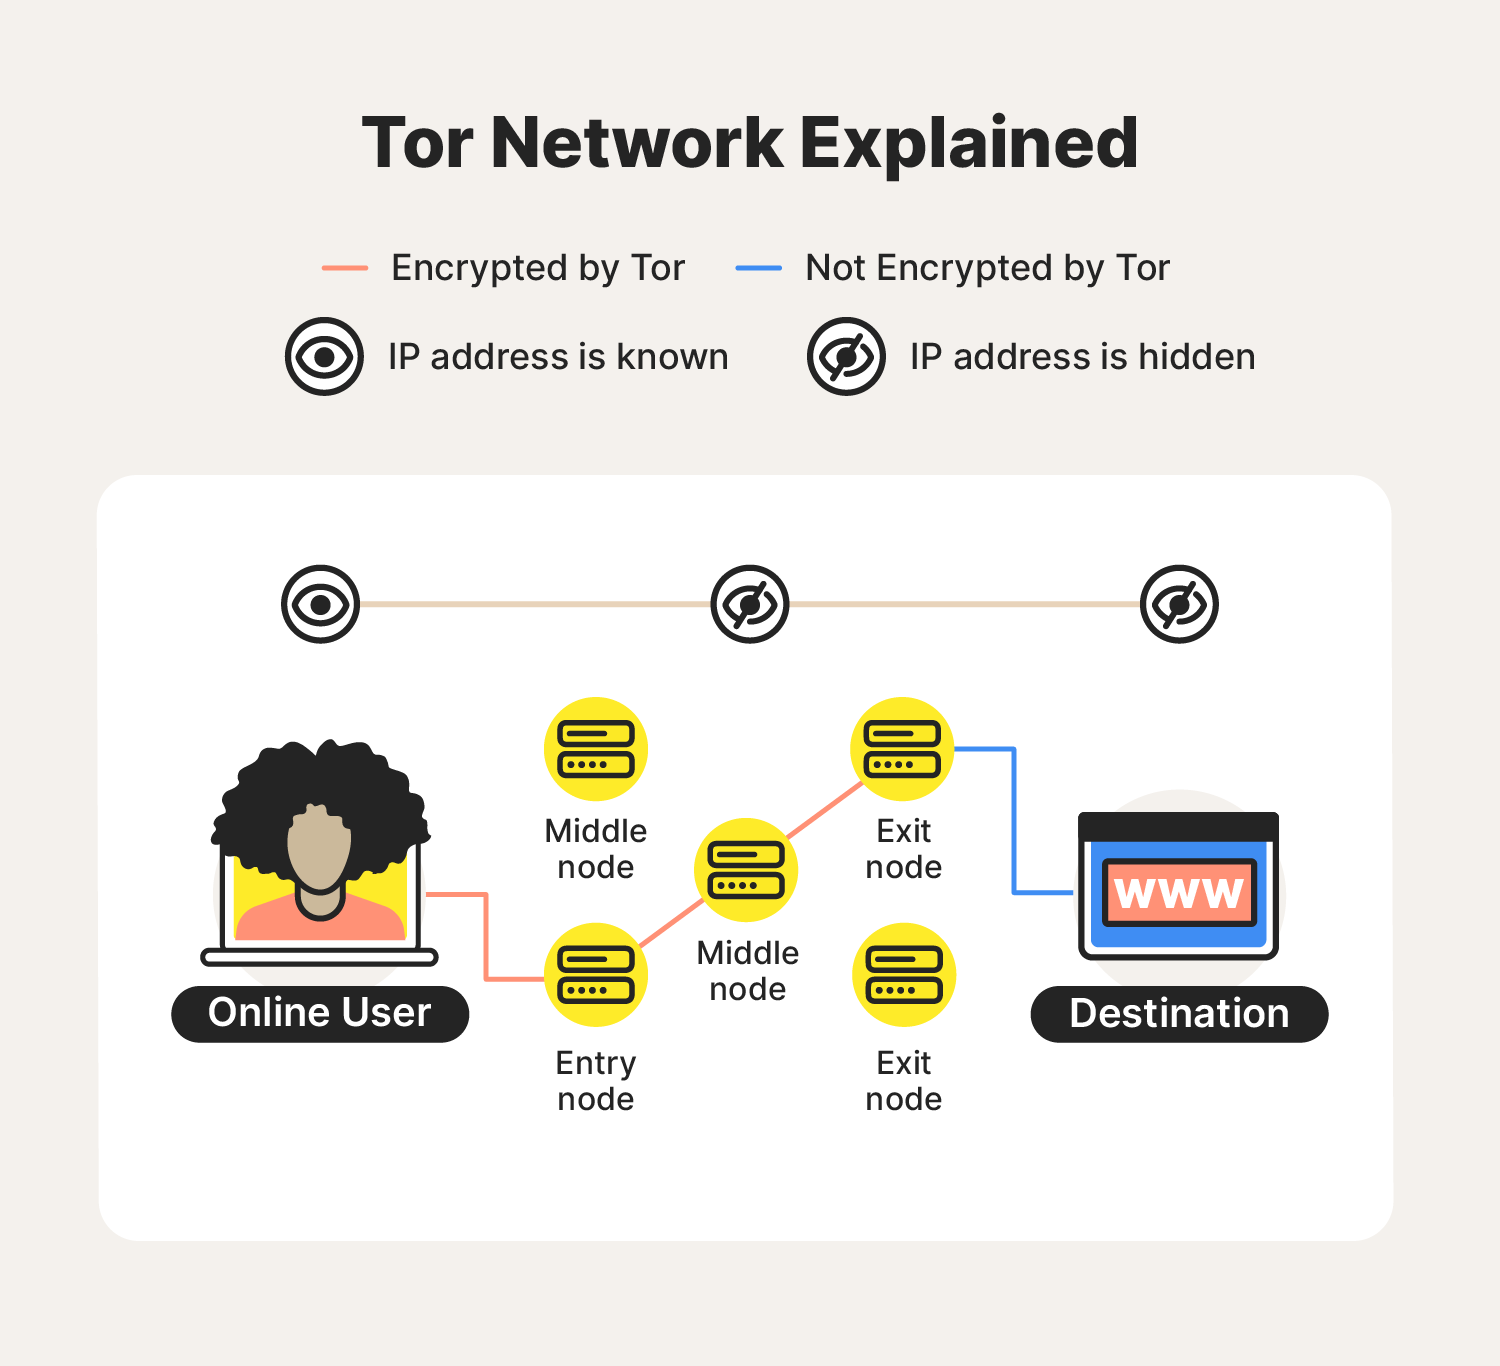 A graphic explains how the Tor Network works, highlighting a key difference between Tor vs. VPN networks.